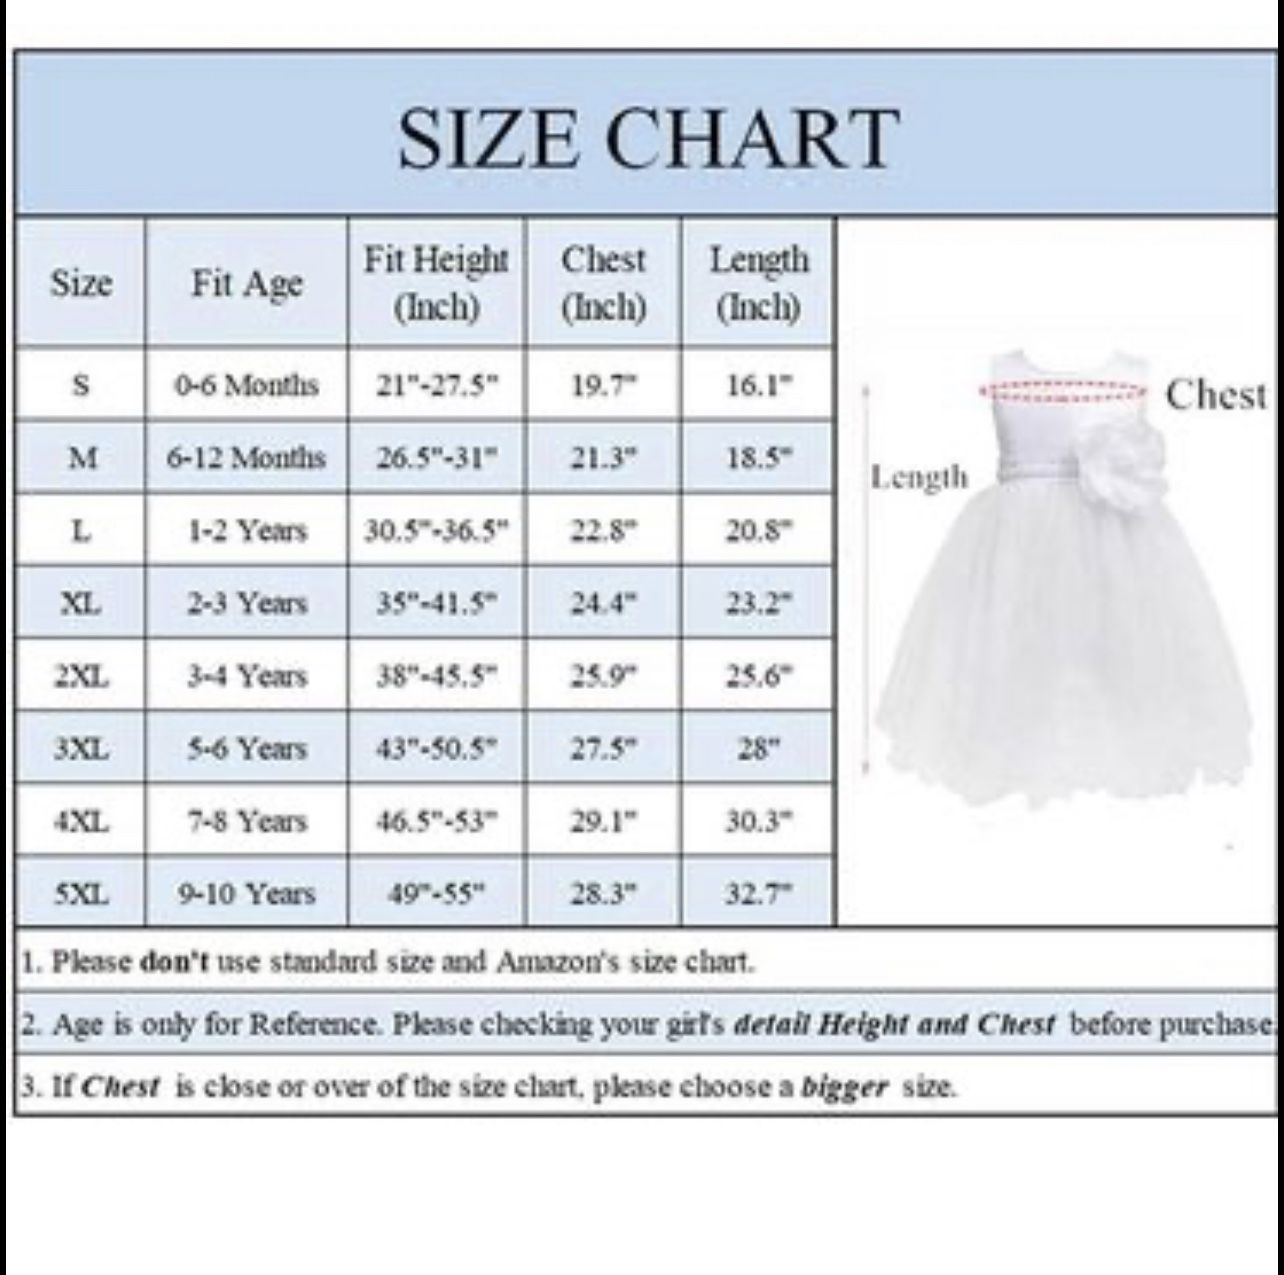 Brandnew Little Girls Tulle Flower Dress Ball Gown for Wedding Birthday Party (XL 2-3 Years)